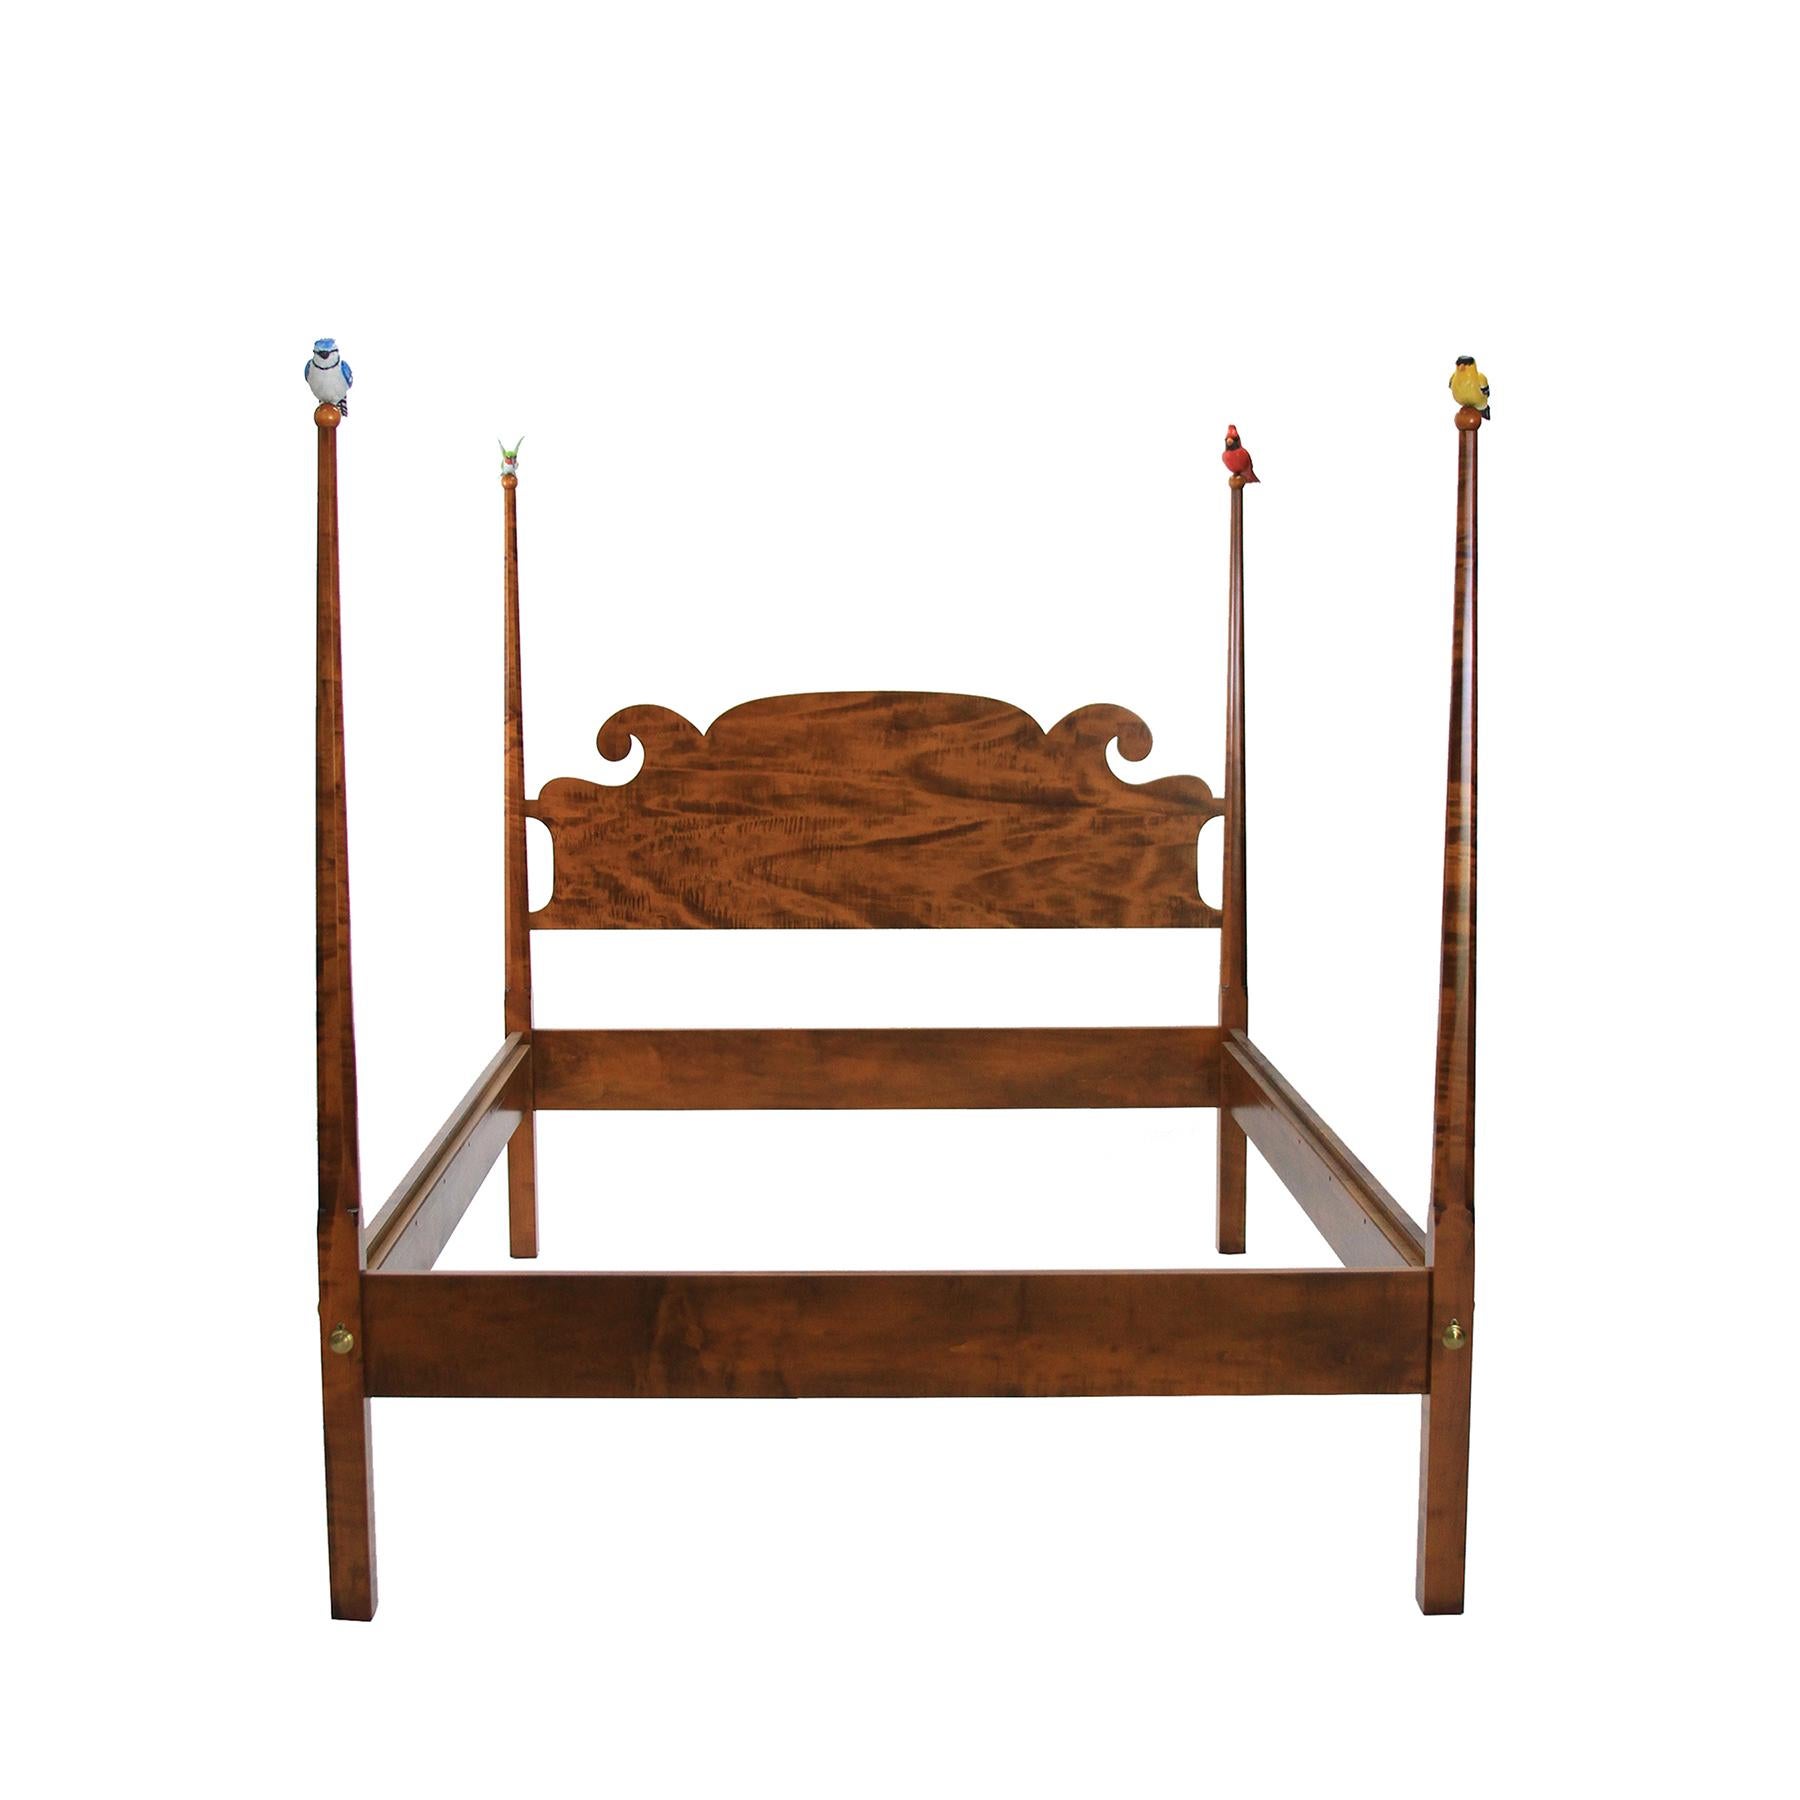 Contemporary Antique Walnut Pencil Post Bed with Hand Carved Folk Art Bird Finials King Sized